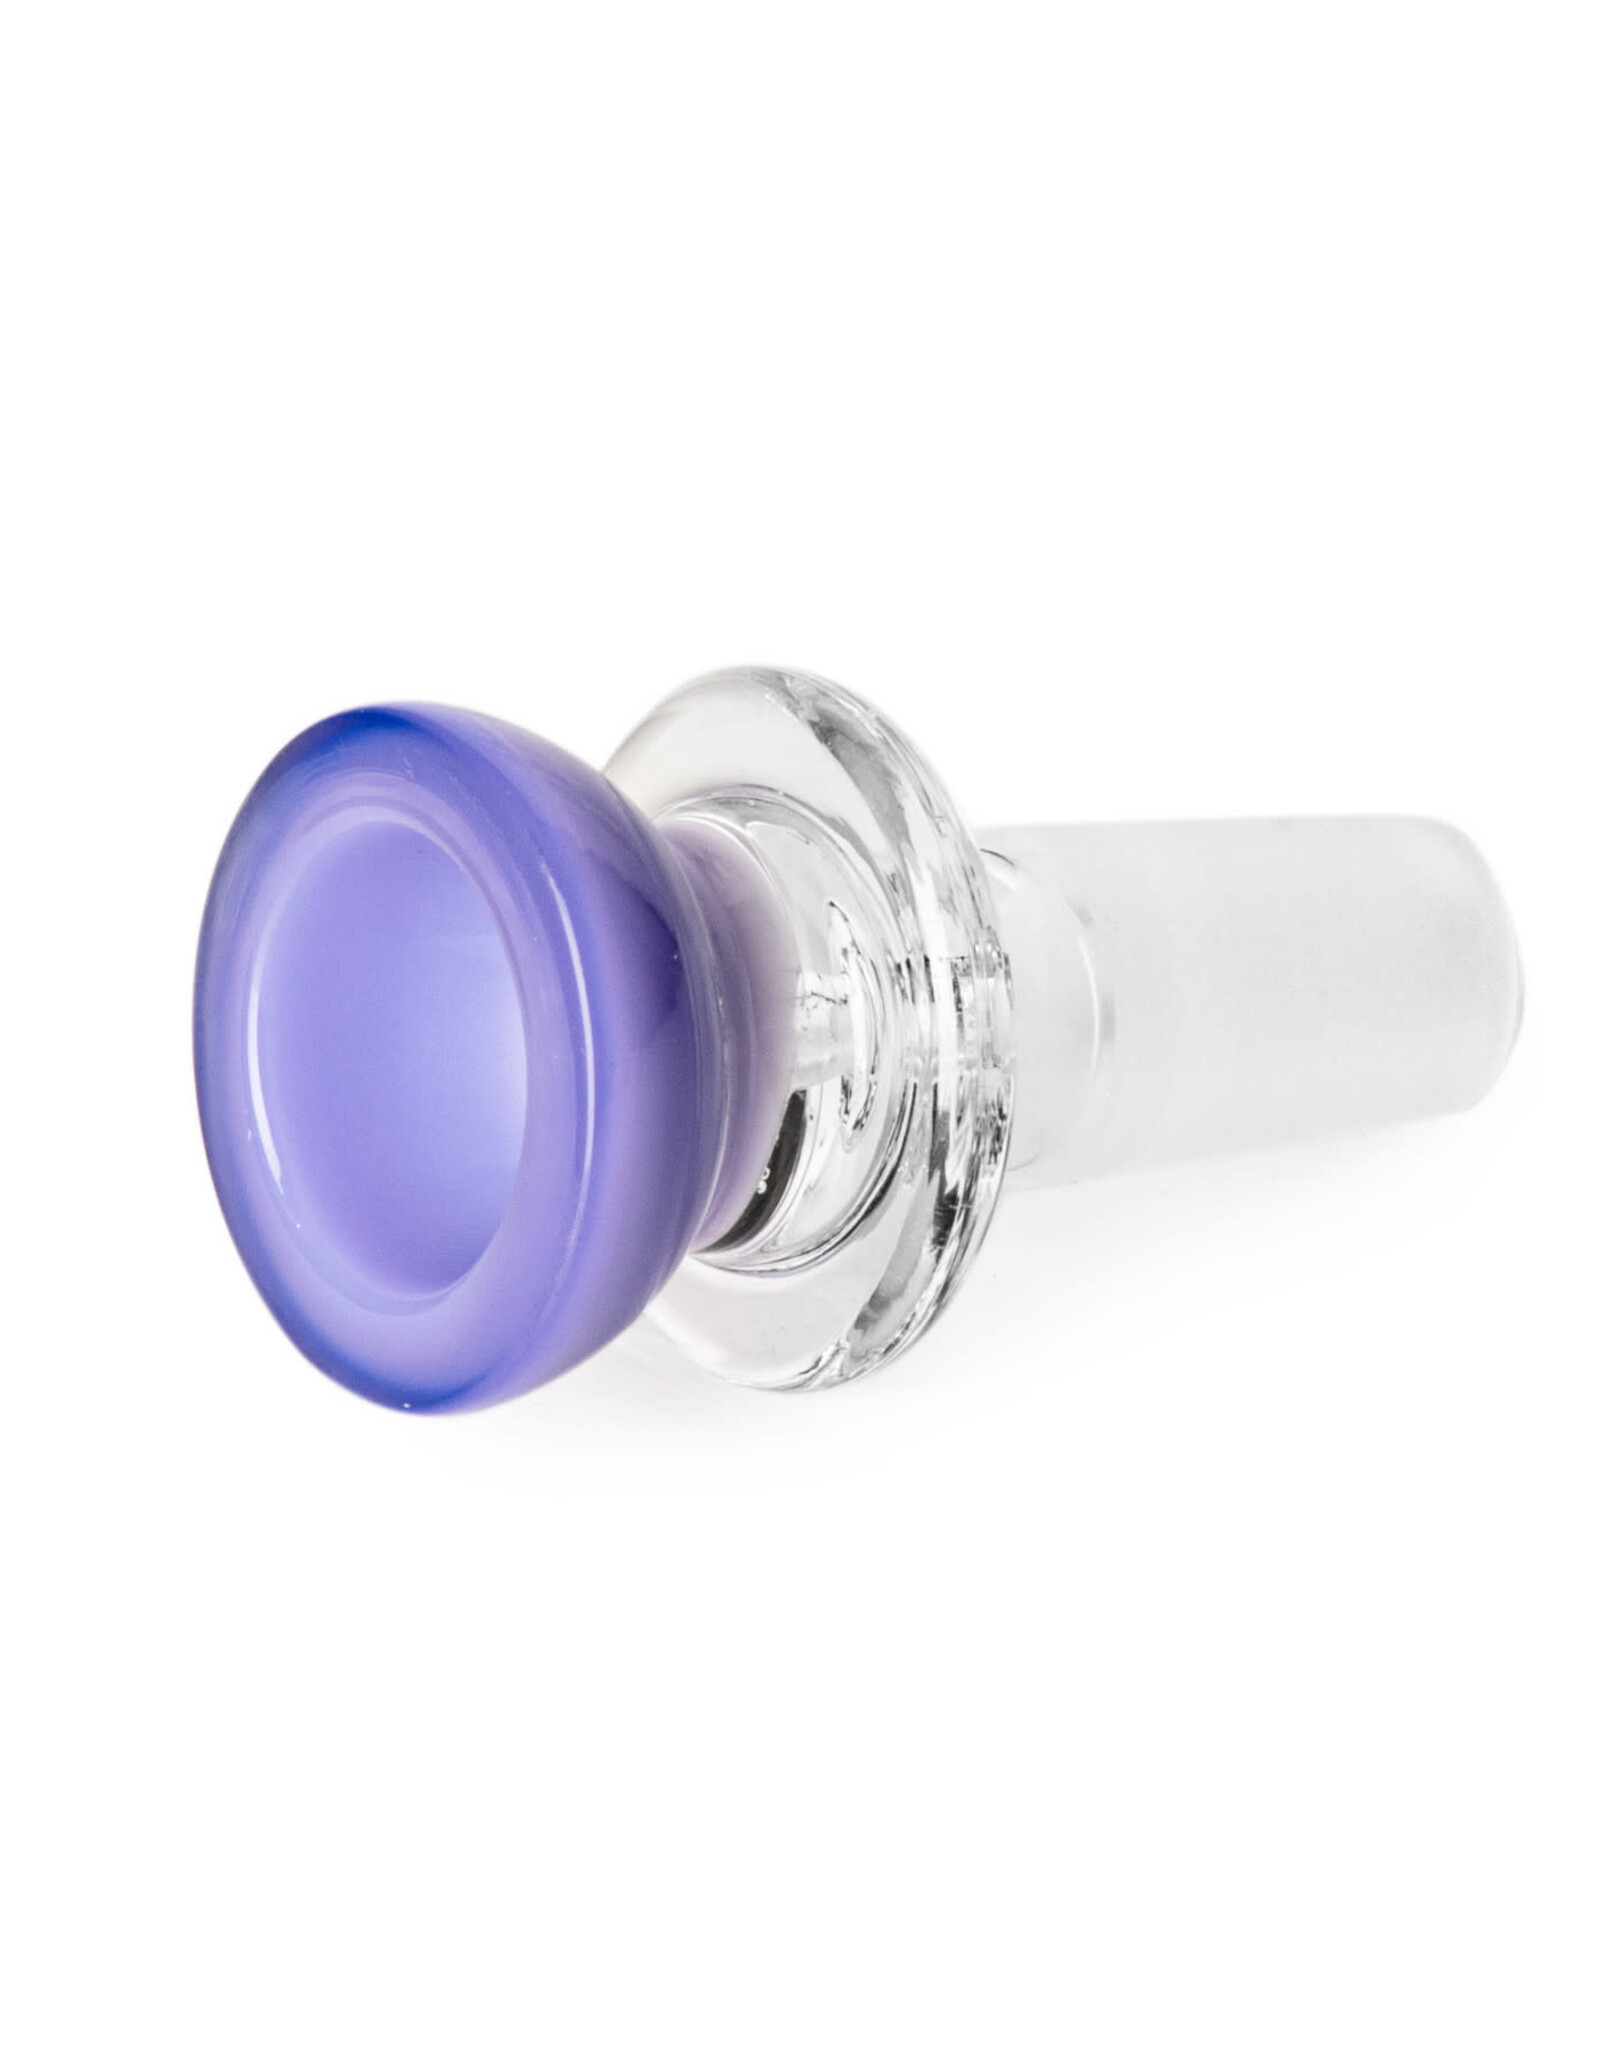 West Coast Gifts 14mm UFO Pull-Out PURPLE